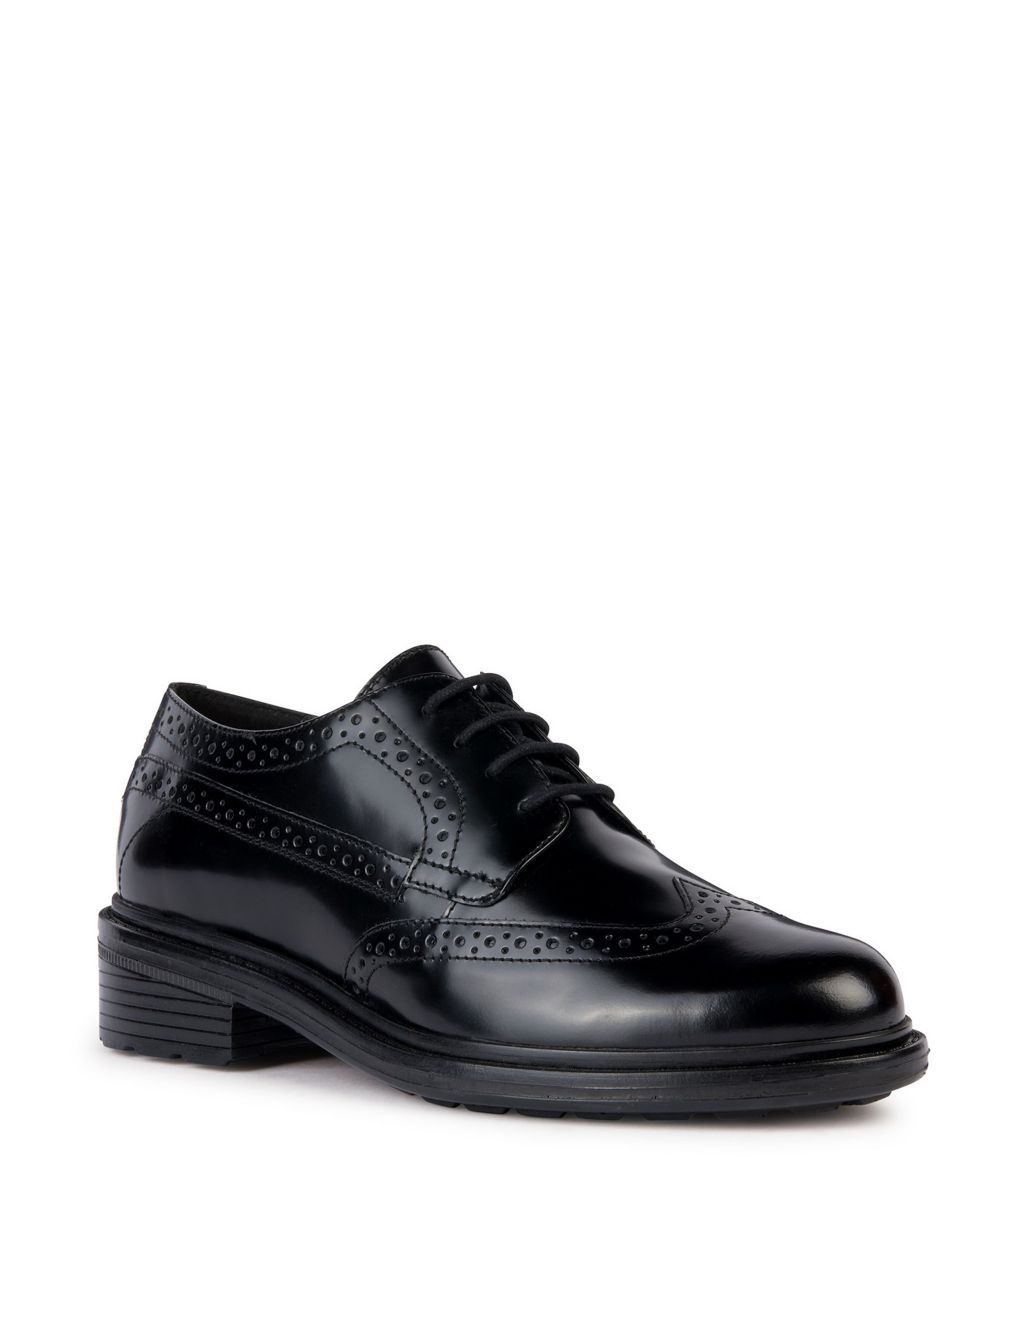 Leather Lace Up Brogues image 2